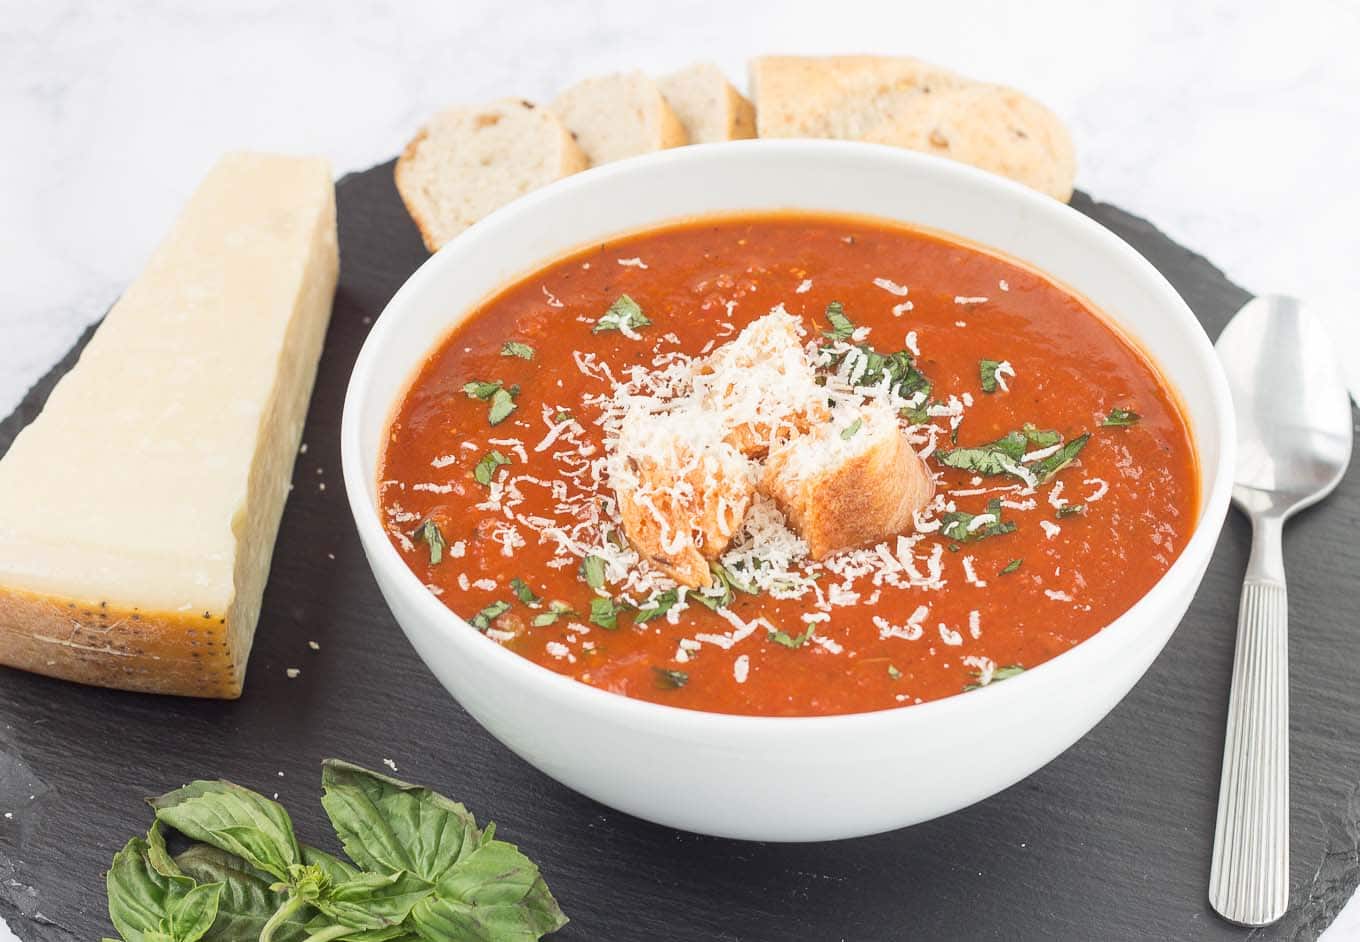 Garden vegetables are roasted to perfection and then placed in the slow cooker to simmer until tender making this Slow Cooker Roasted Red Pepper and Tomato Soup delicious and comforting. Top with freshly grated parmesan cheese and basil and serve a chunk of hearty bread on the side for the perfect weeknight dinner. | Strawberry Blondie Kitchen